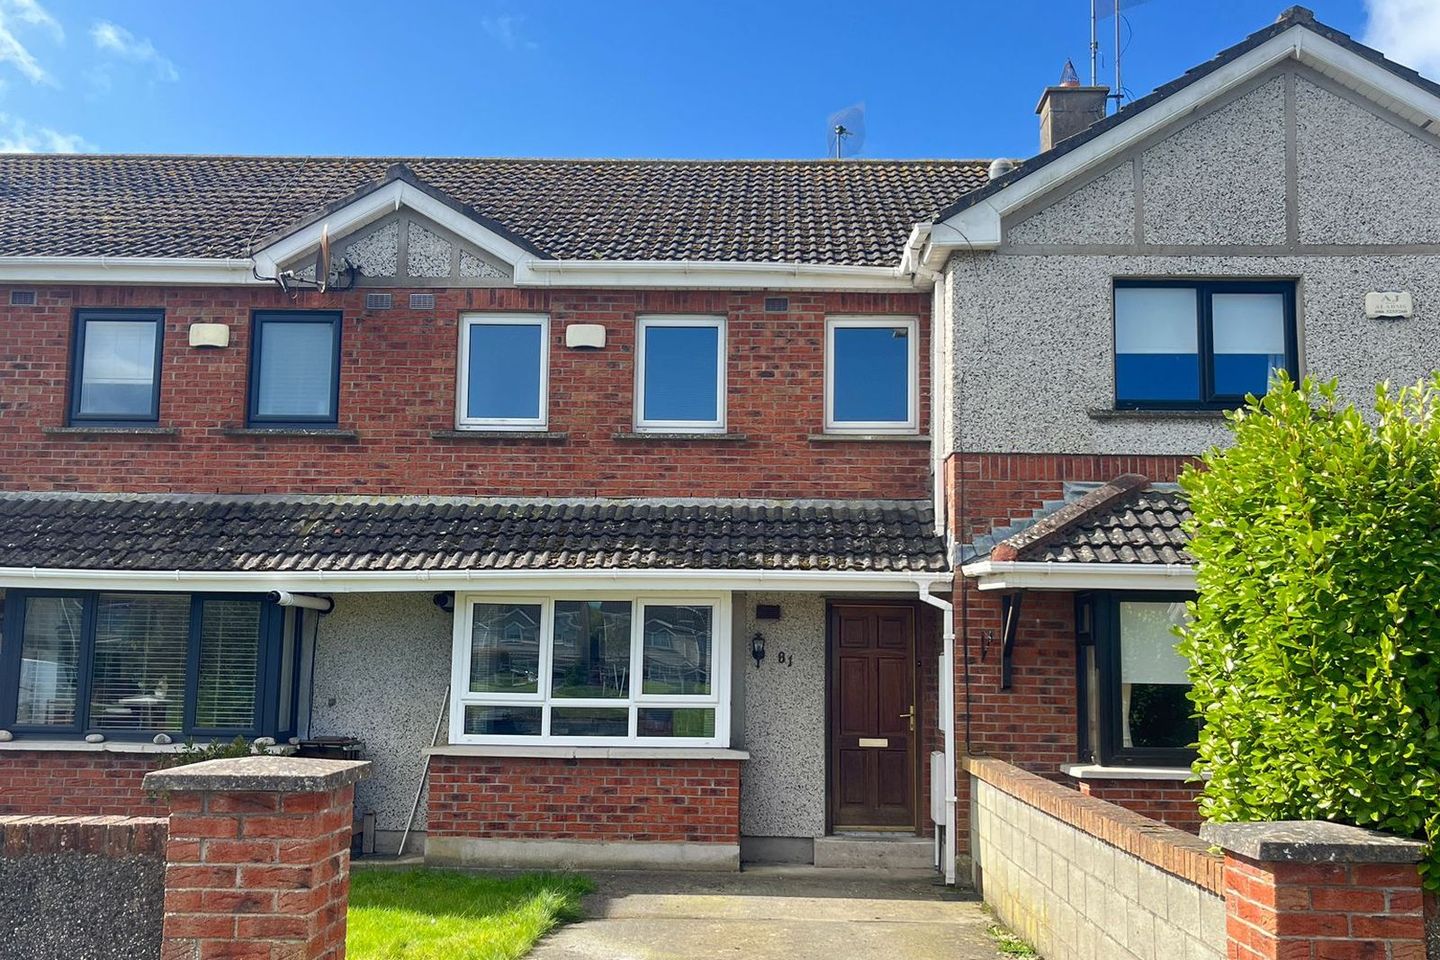 81 Castle Manor, Ballymakenny Road, Drogheda, Co. Louth, A92TYW1